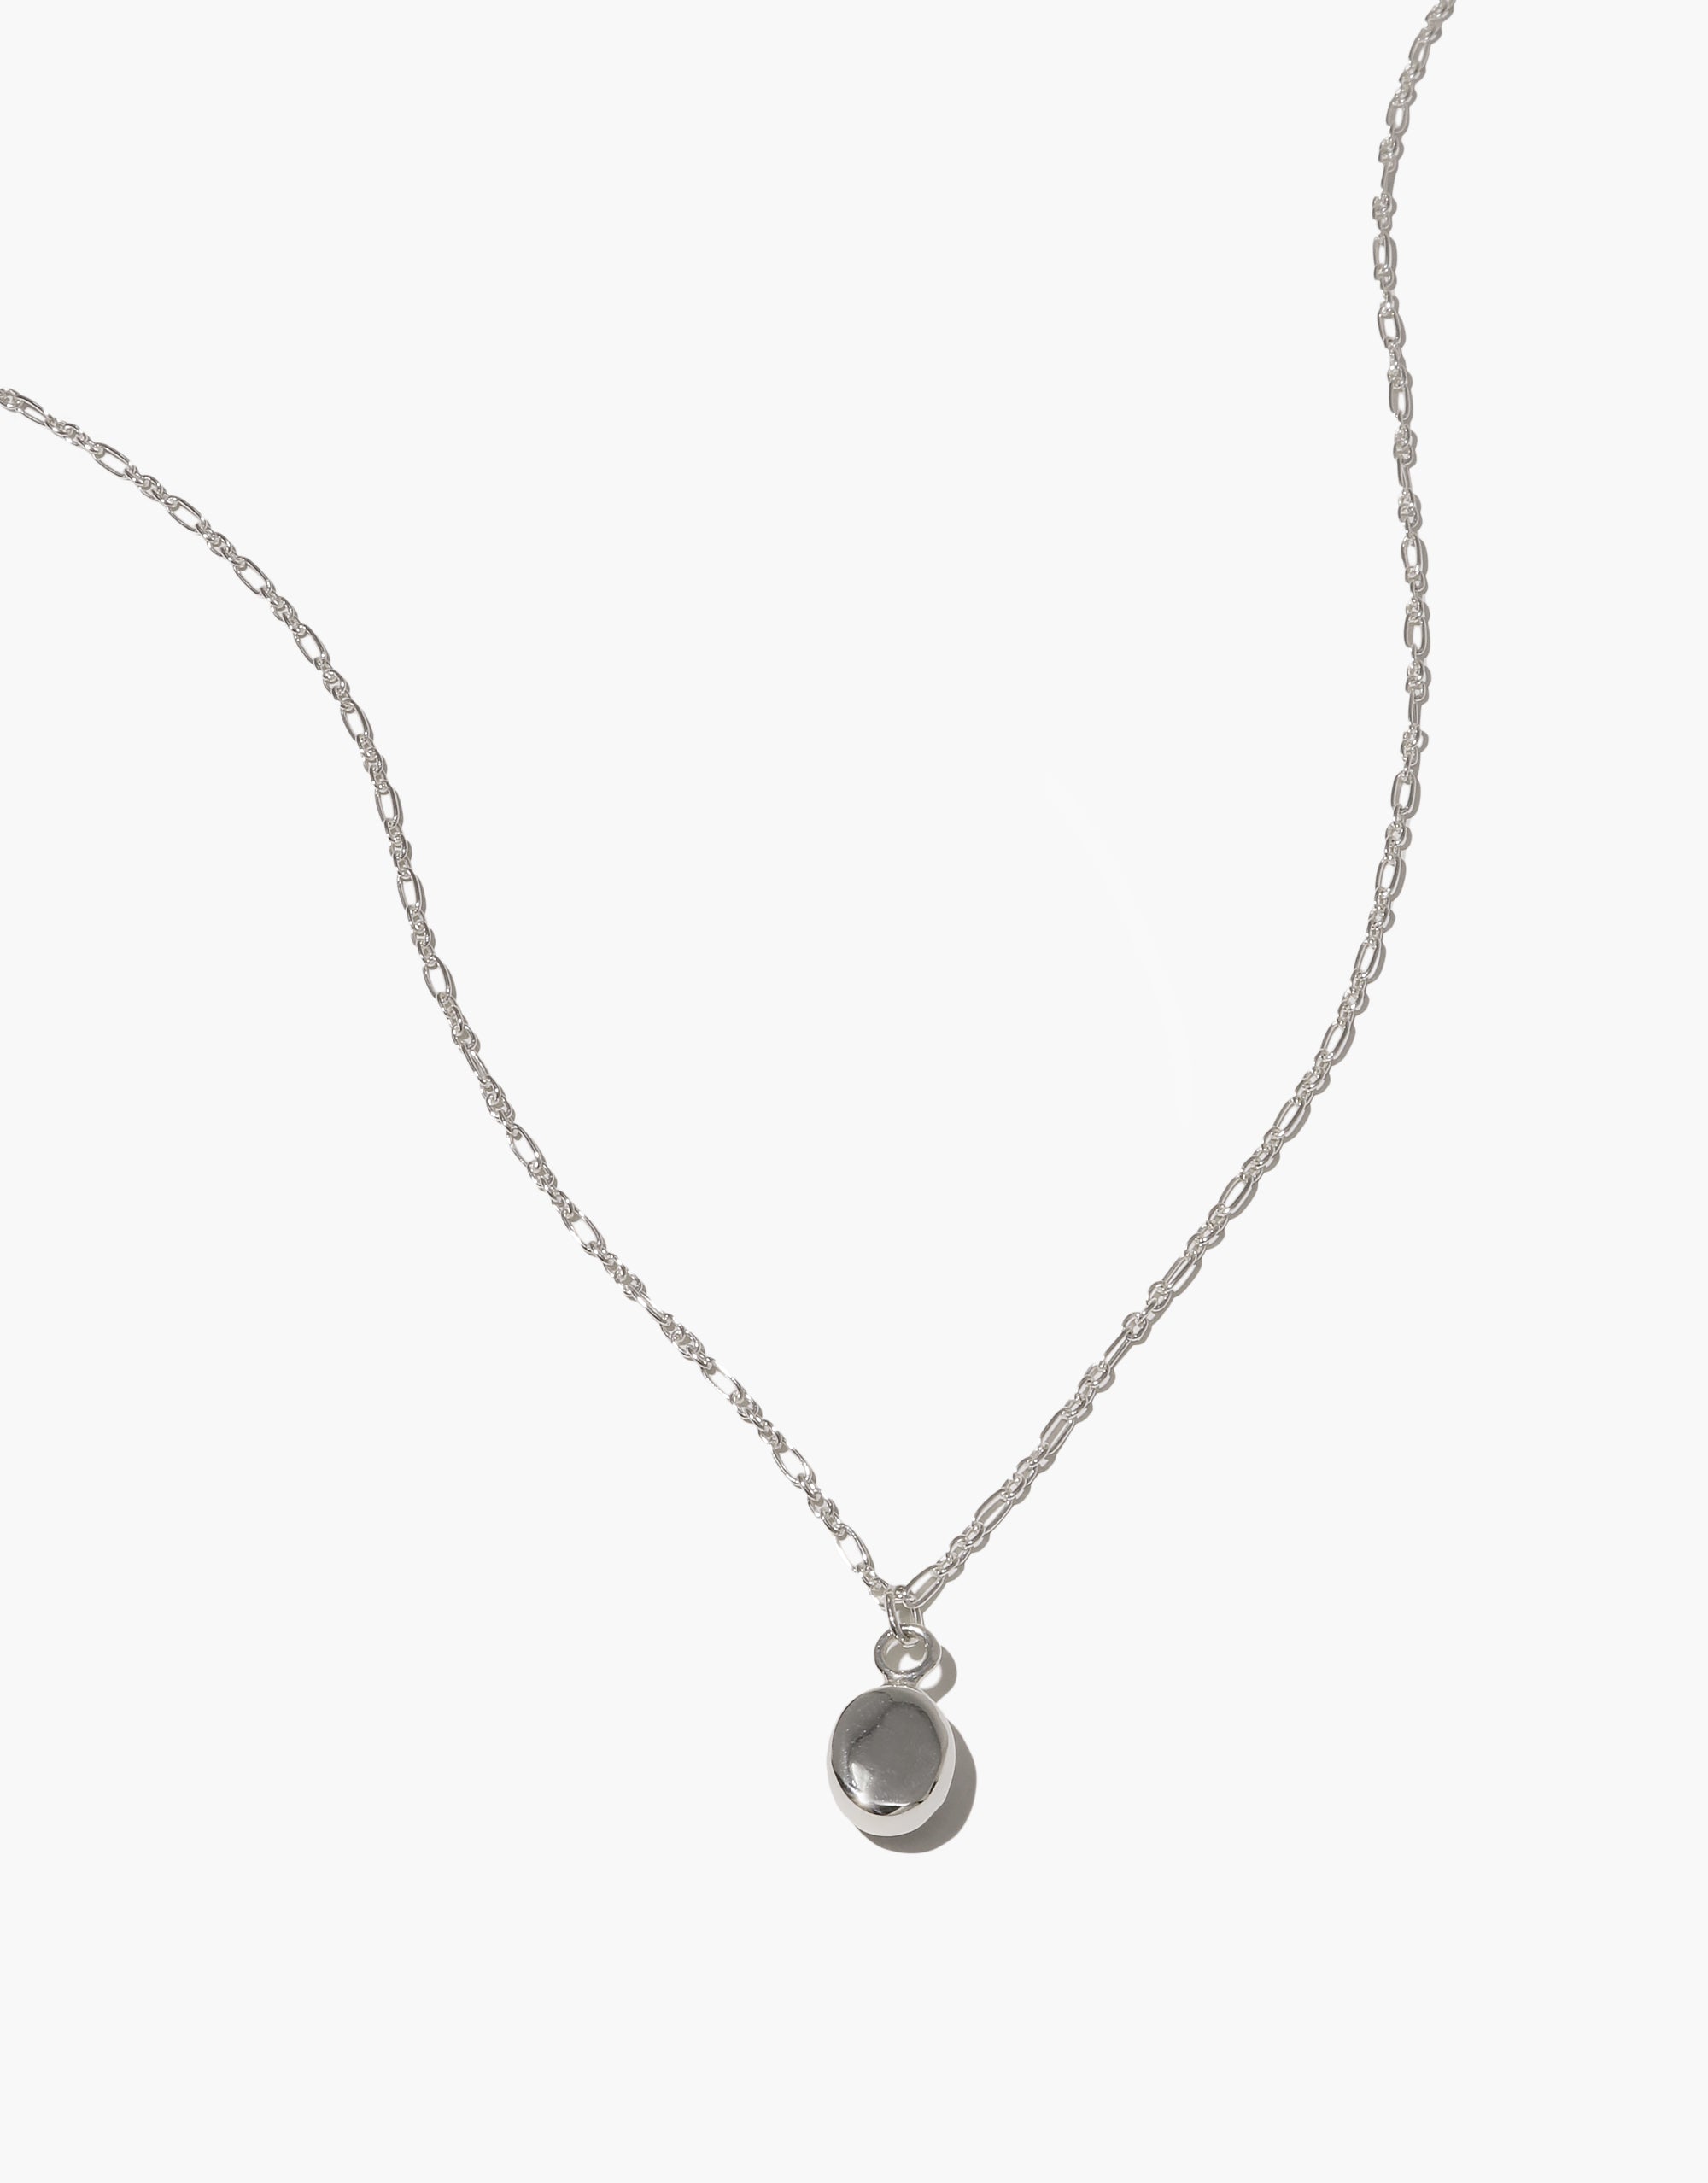 Oval Charm Necklace